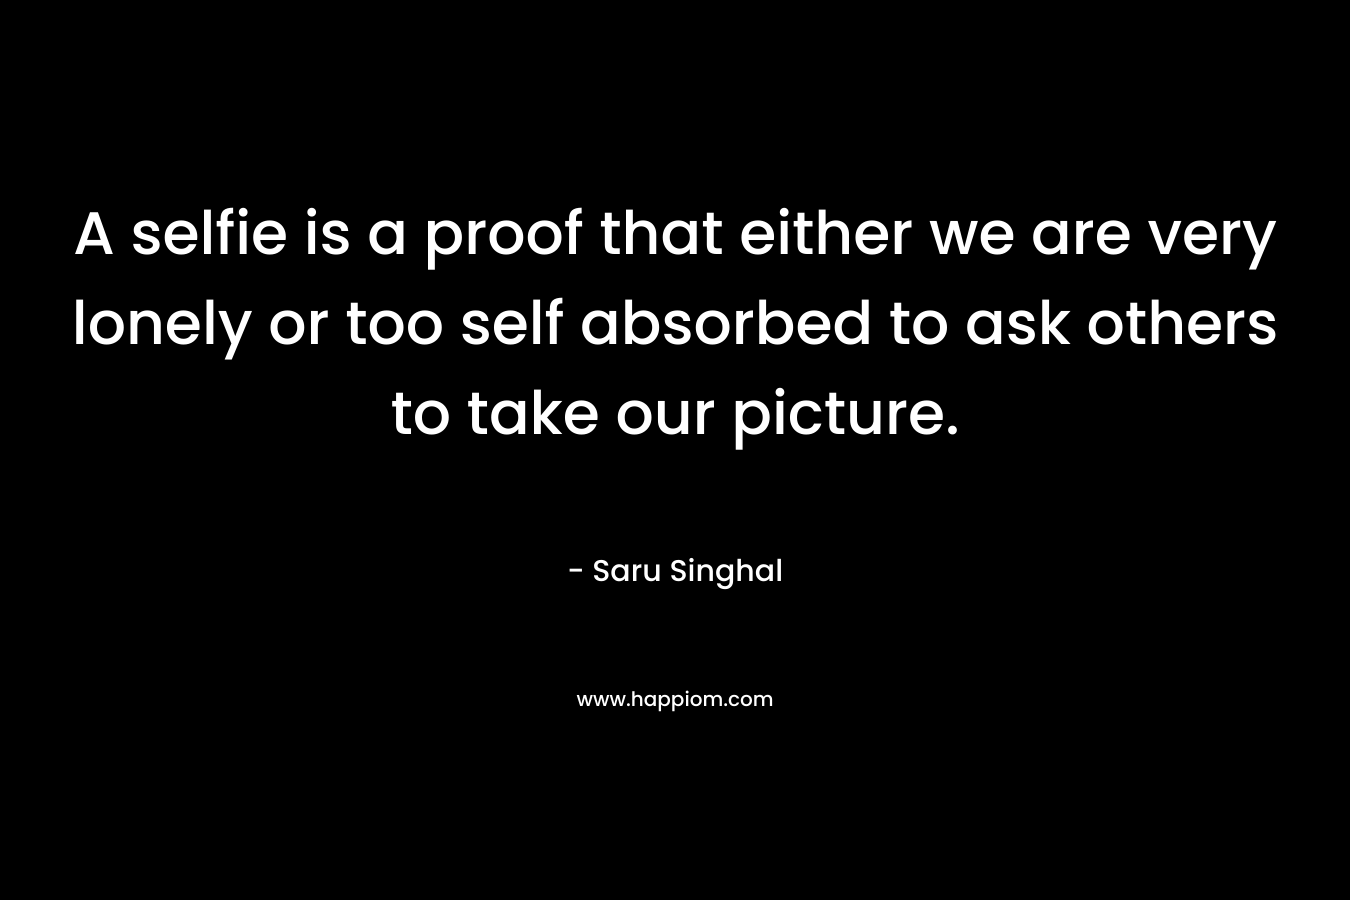 A selfie is a proof that either we are very lonely or too self absorbed to ask others to take our picture. – Saru Singhal